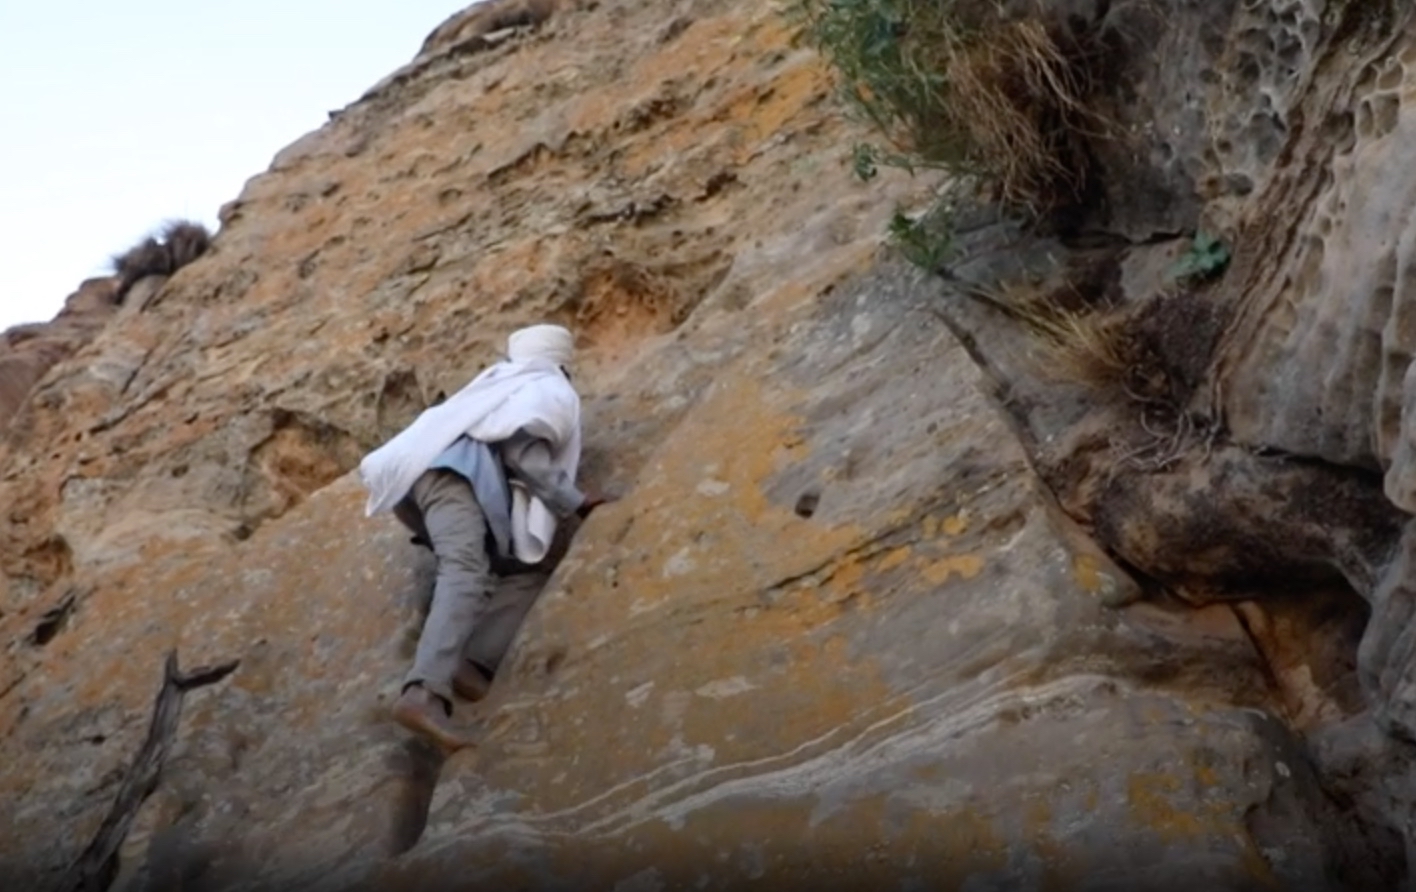 Every day, this priest climbs a sheer cliff to get to church